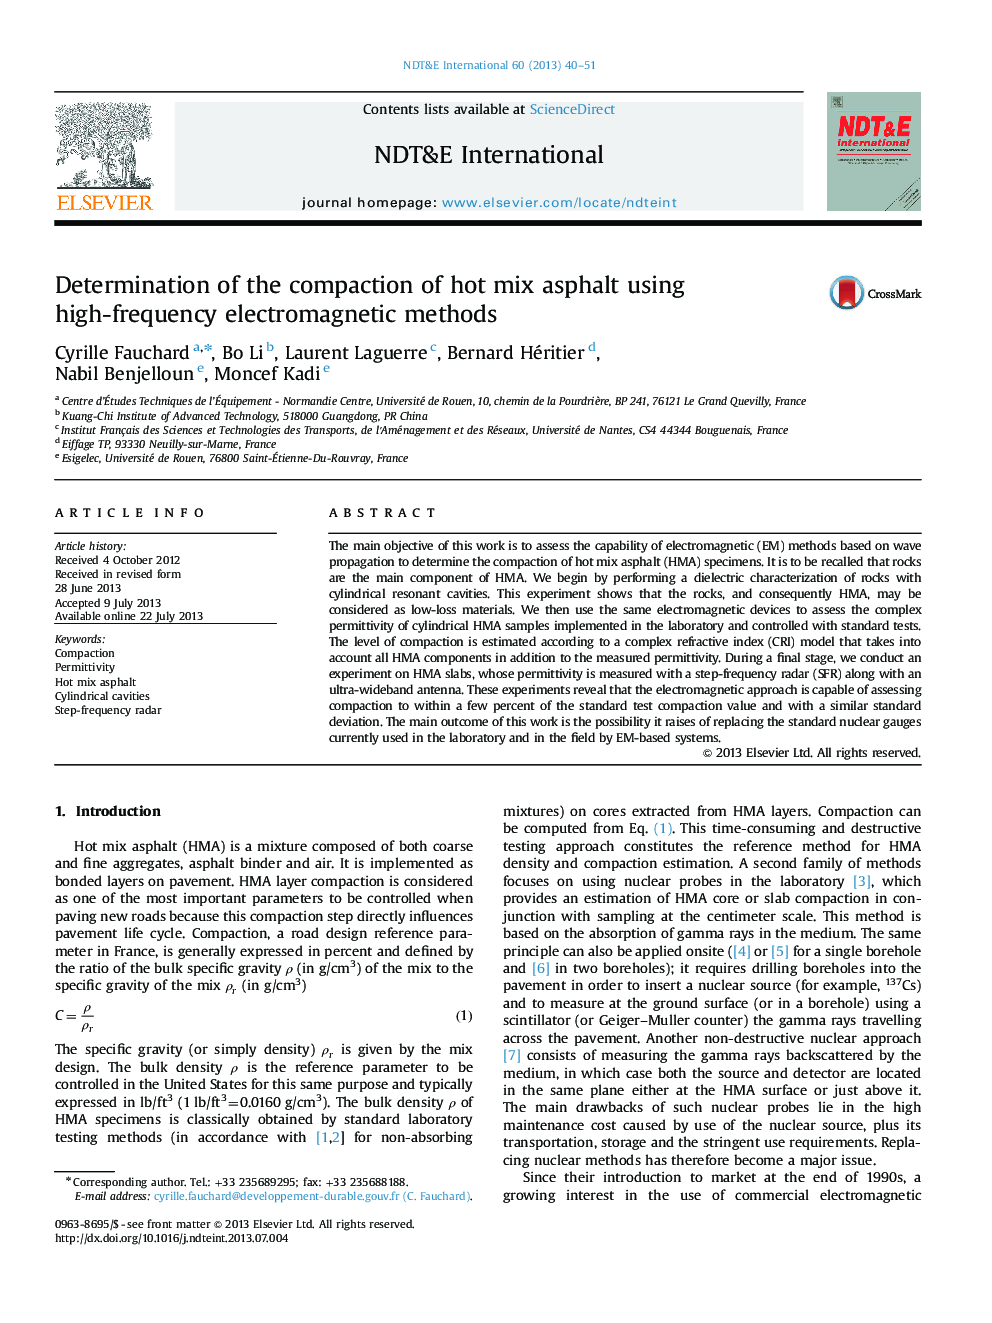 Determination of the compaction of hot mix asphalt using high-frequency electromagnetic methods